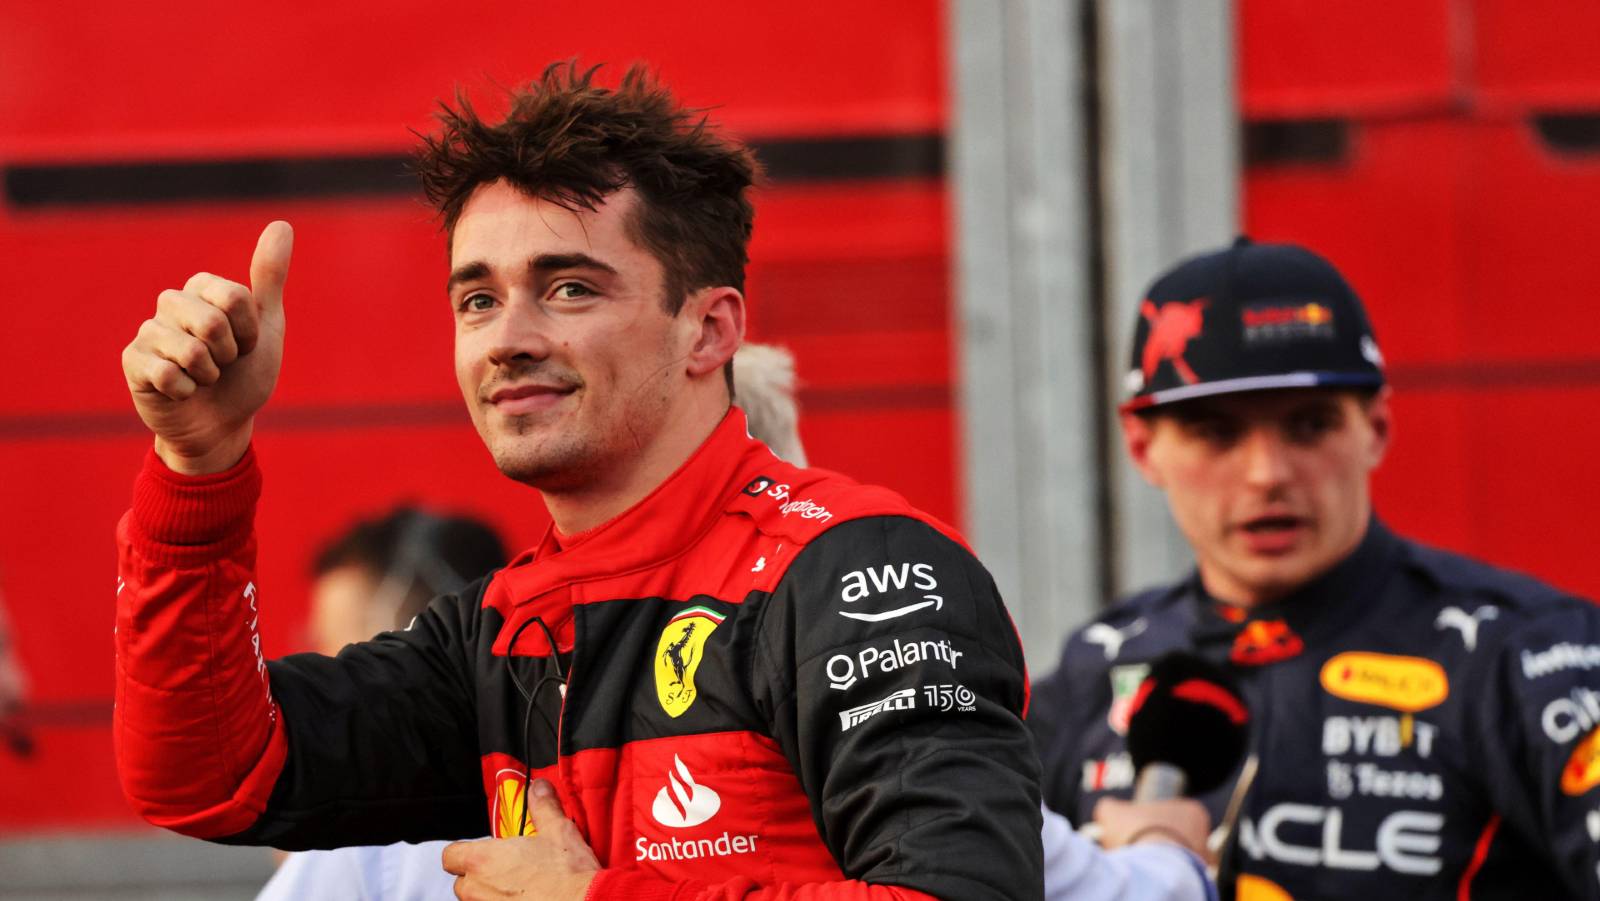 Charles Leclerc gives the thumbs-up, with Max Verstappen in the background. Melbourne April 2022.